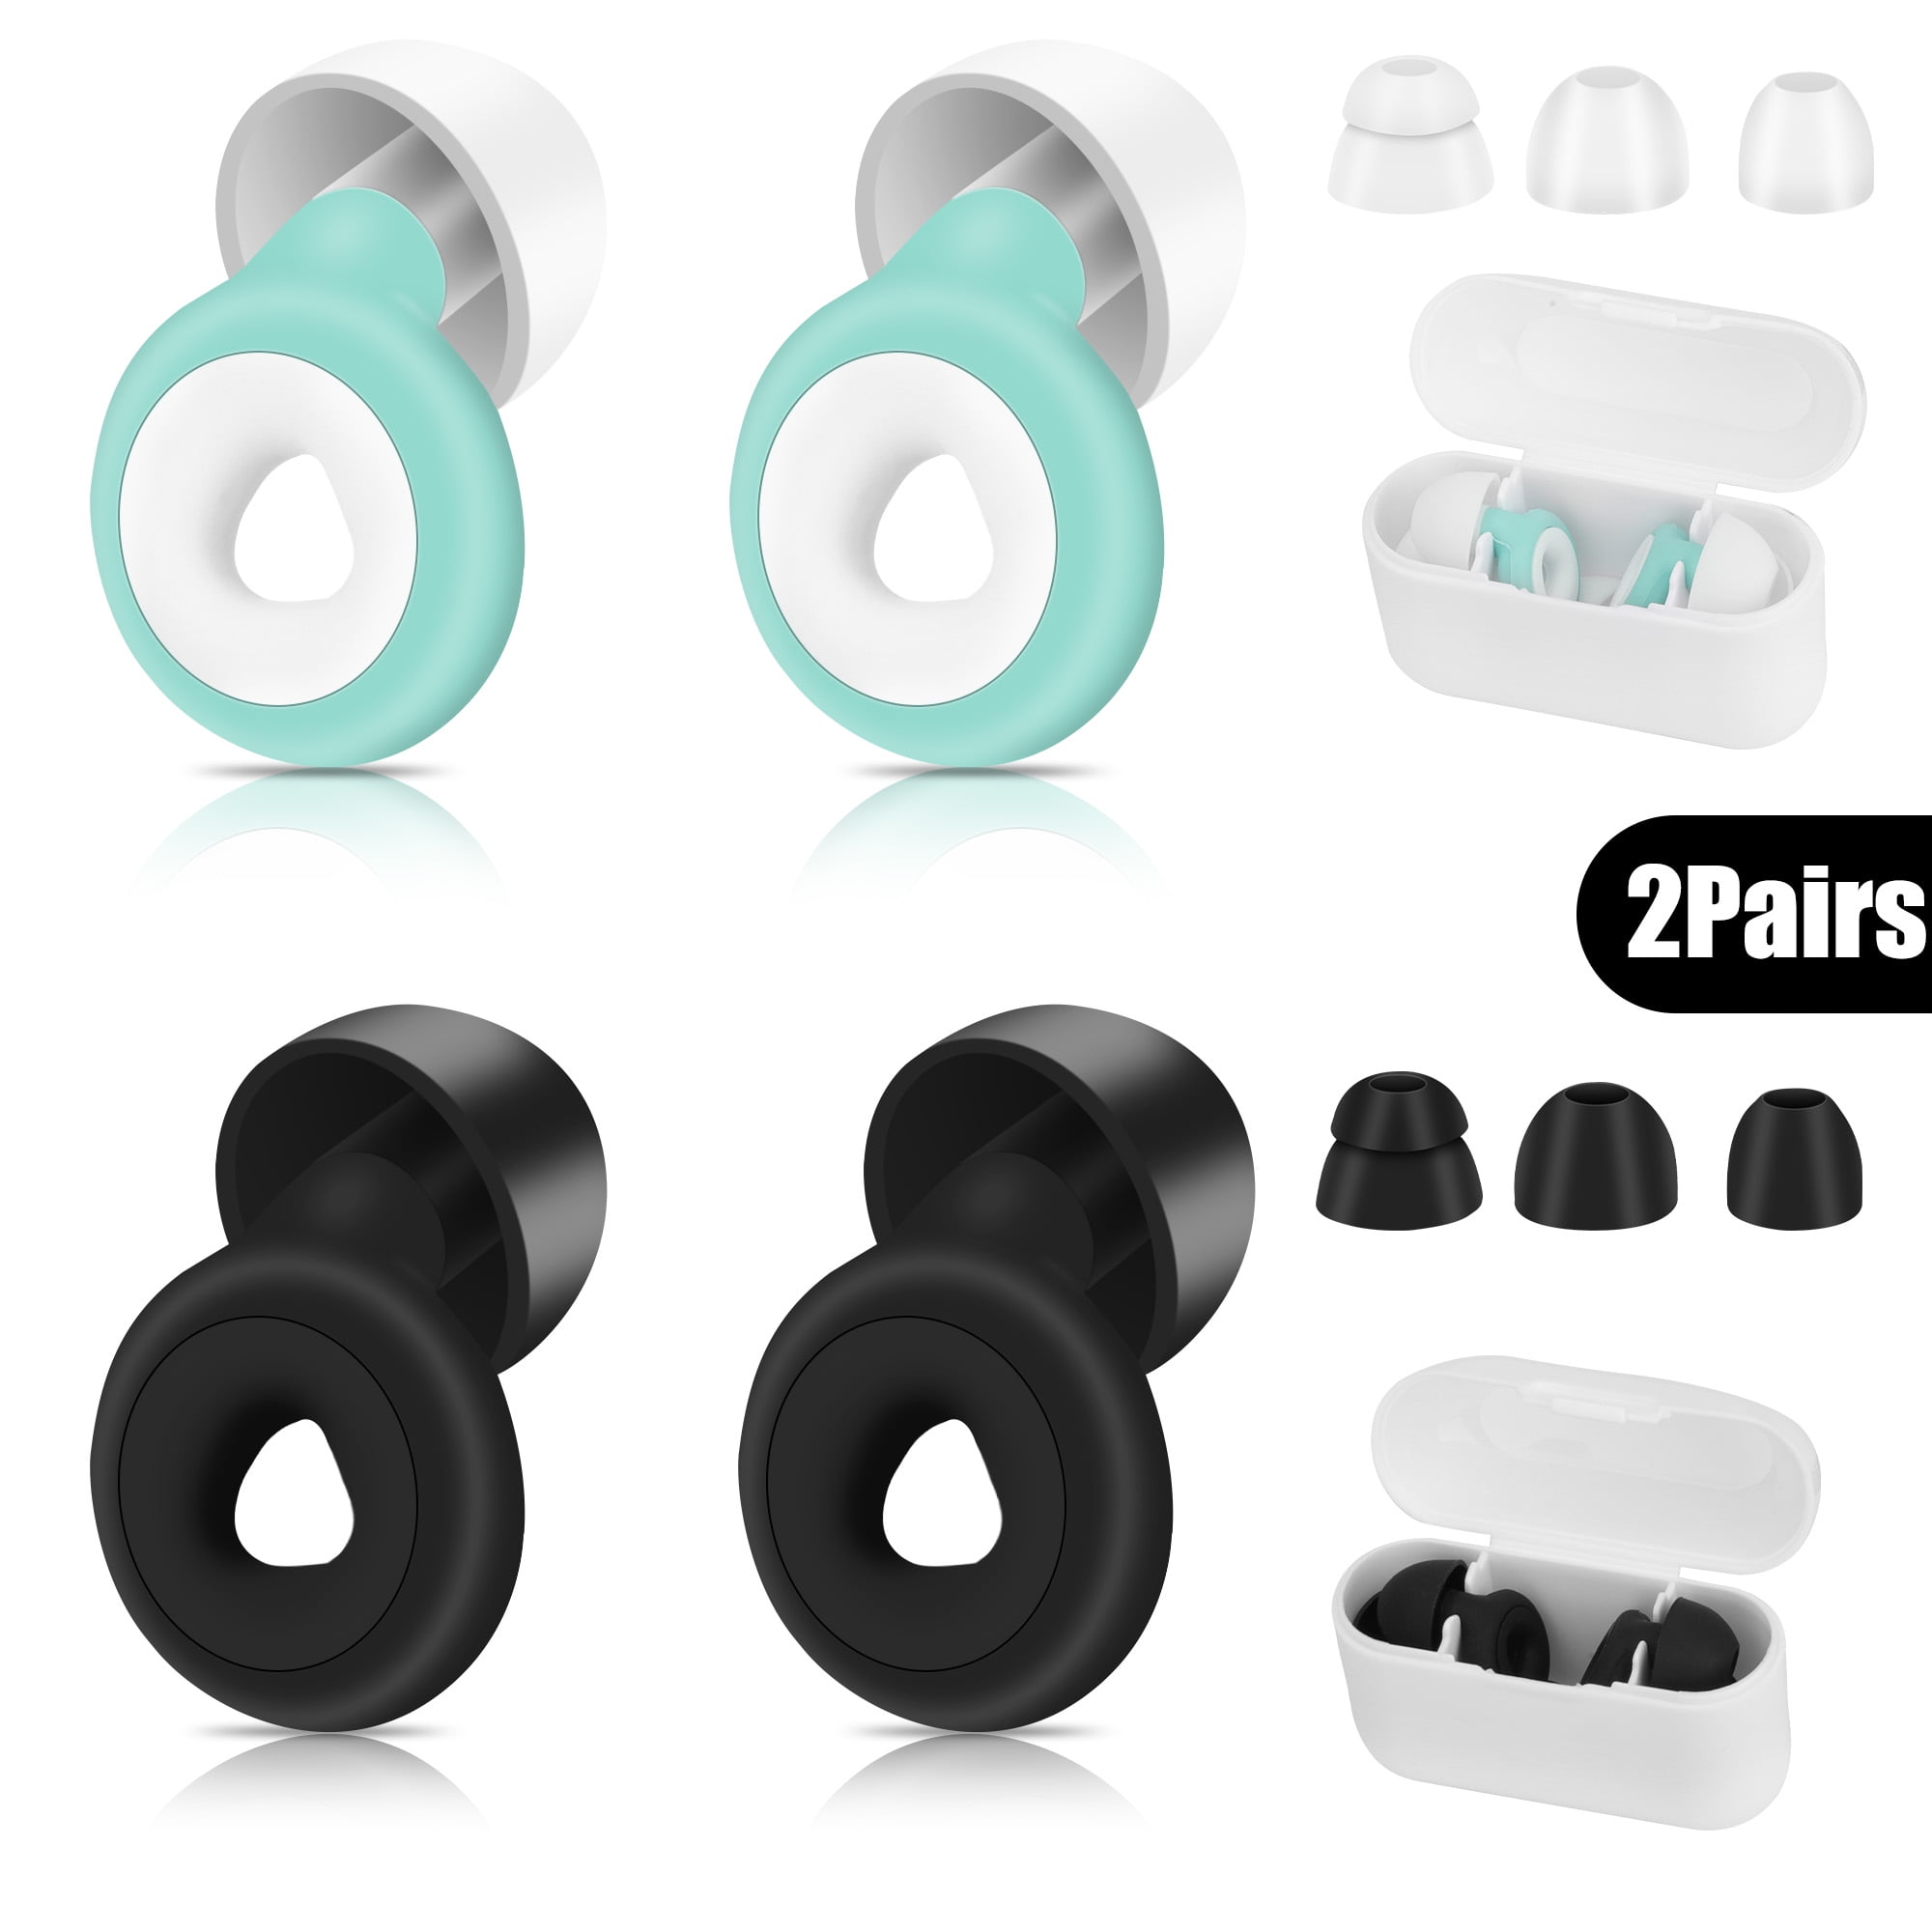 Loop quiet ear plugs are a soft, reusable way to get a silent night's sleep